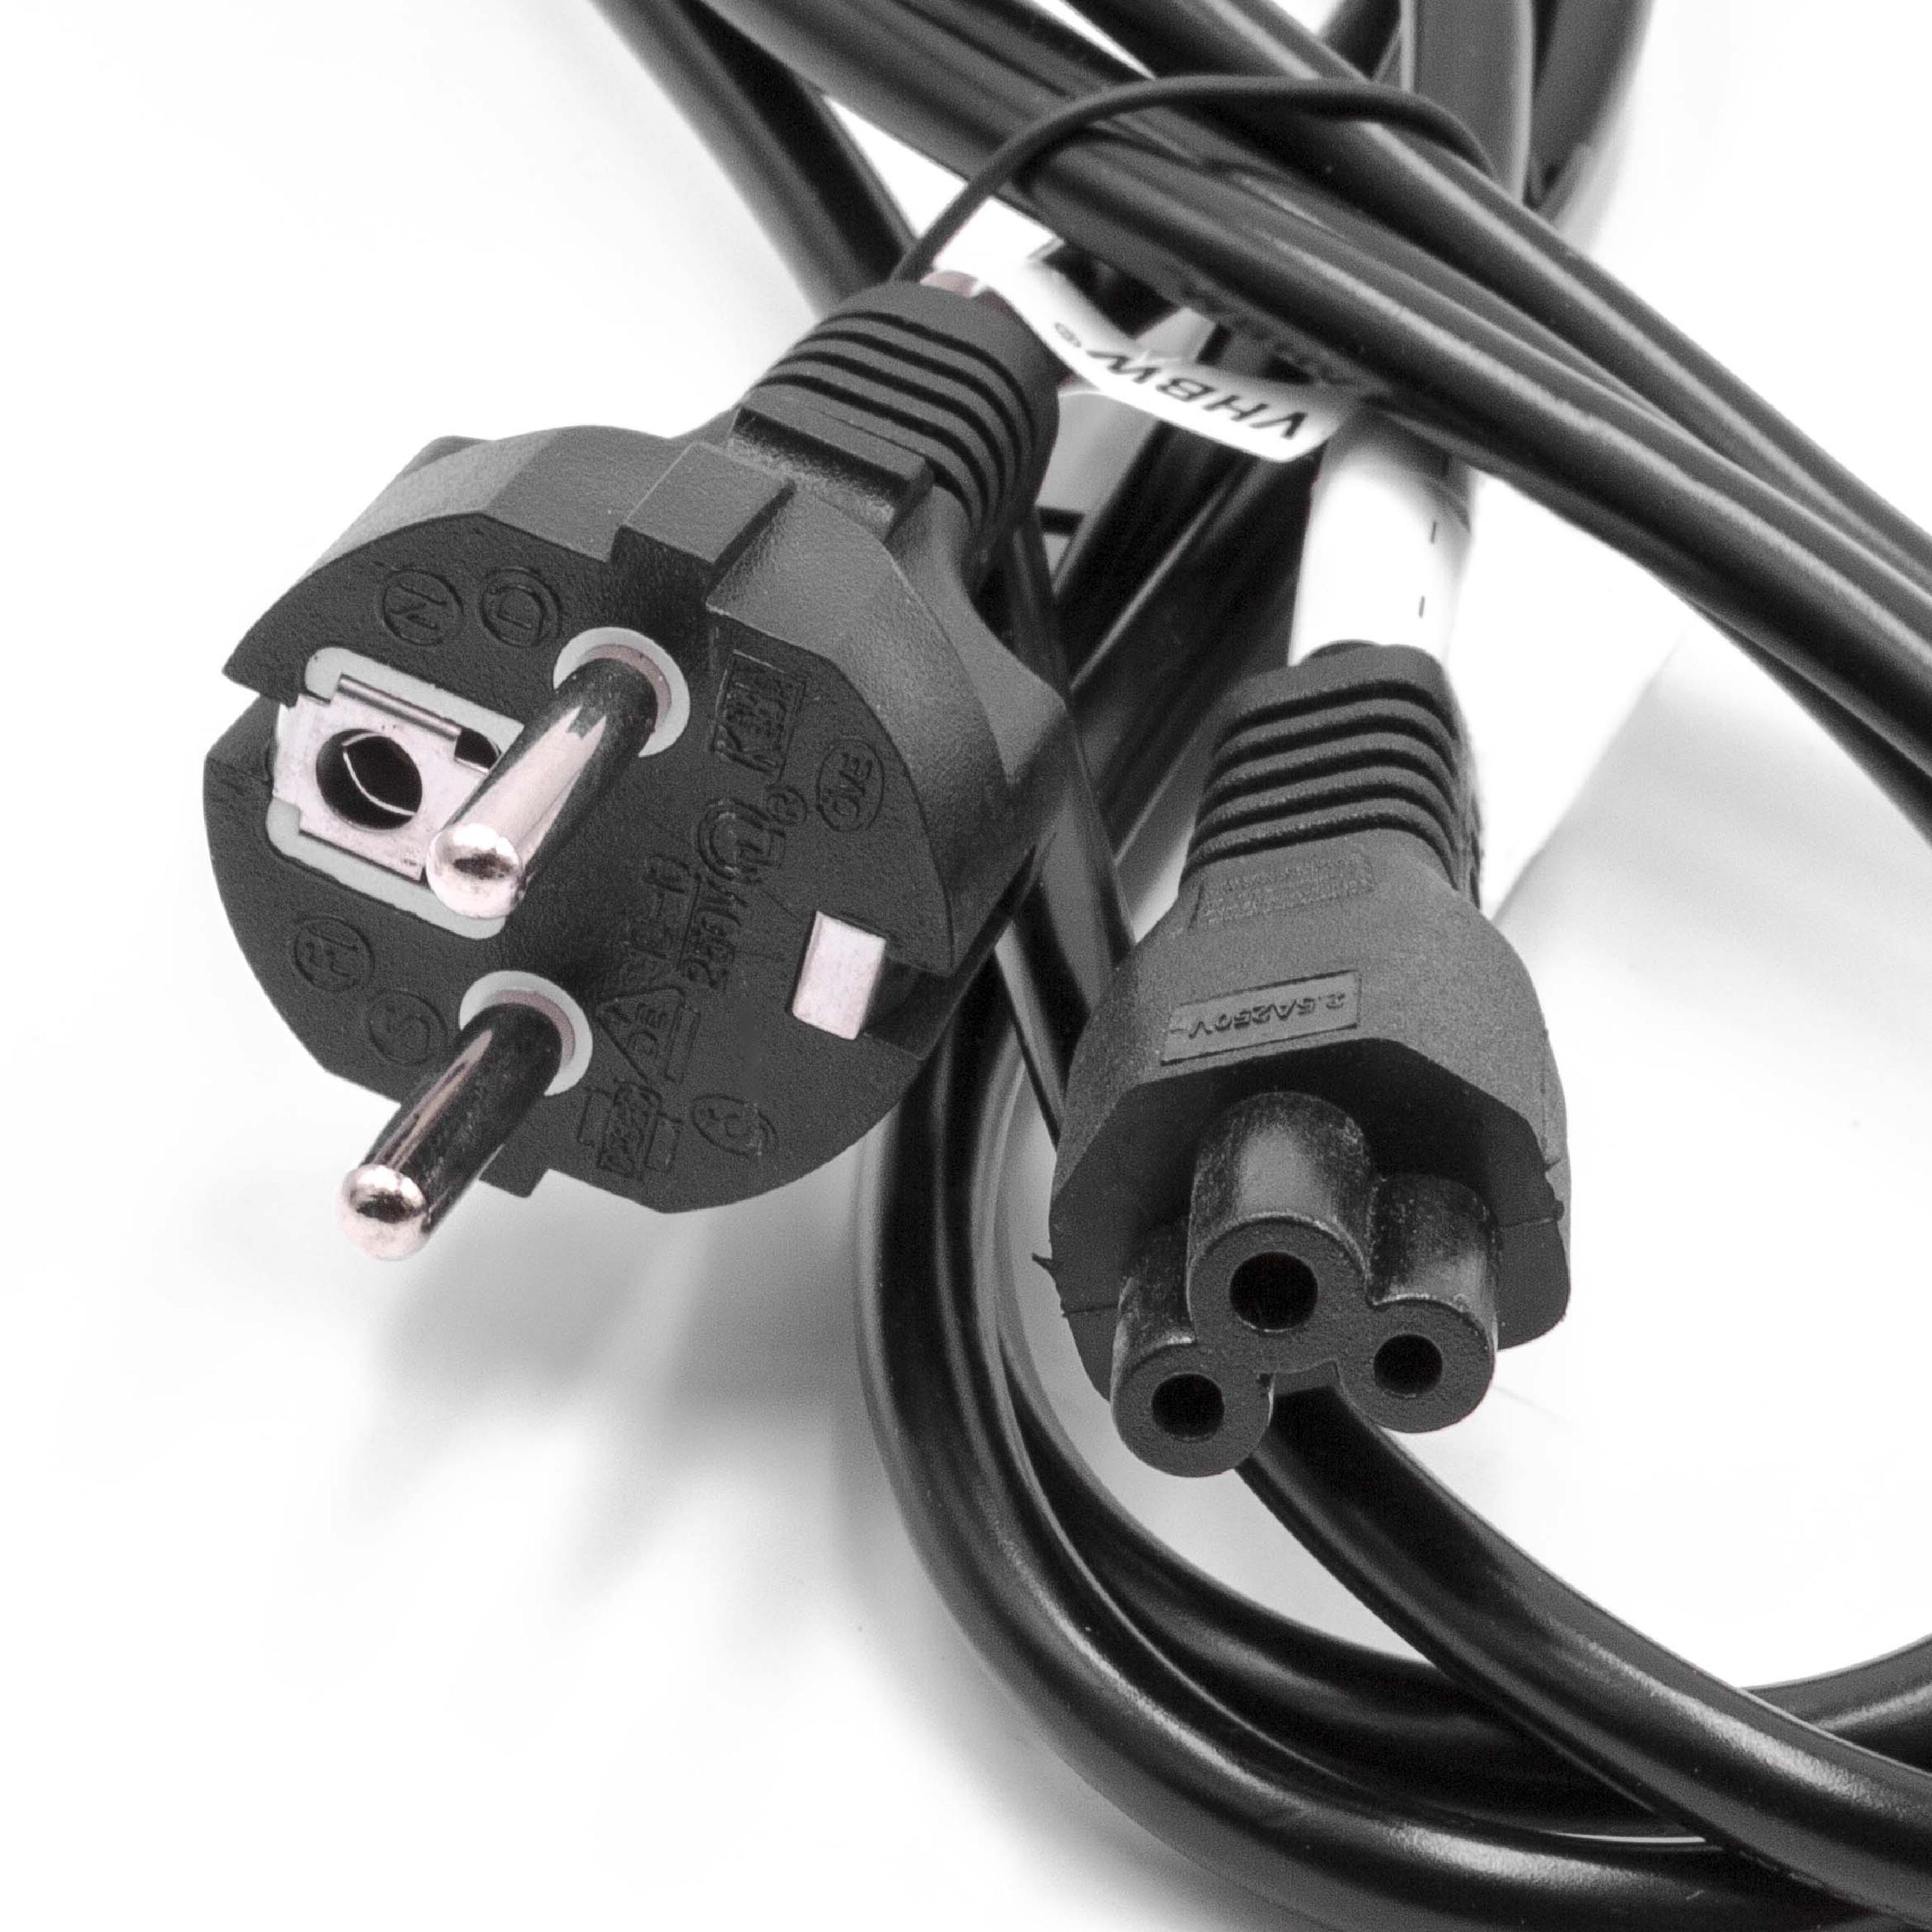 C5 Power Cable Euro Plug suitable for Robot Vacuum Cleaner - 2 m